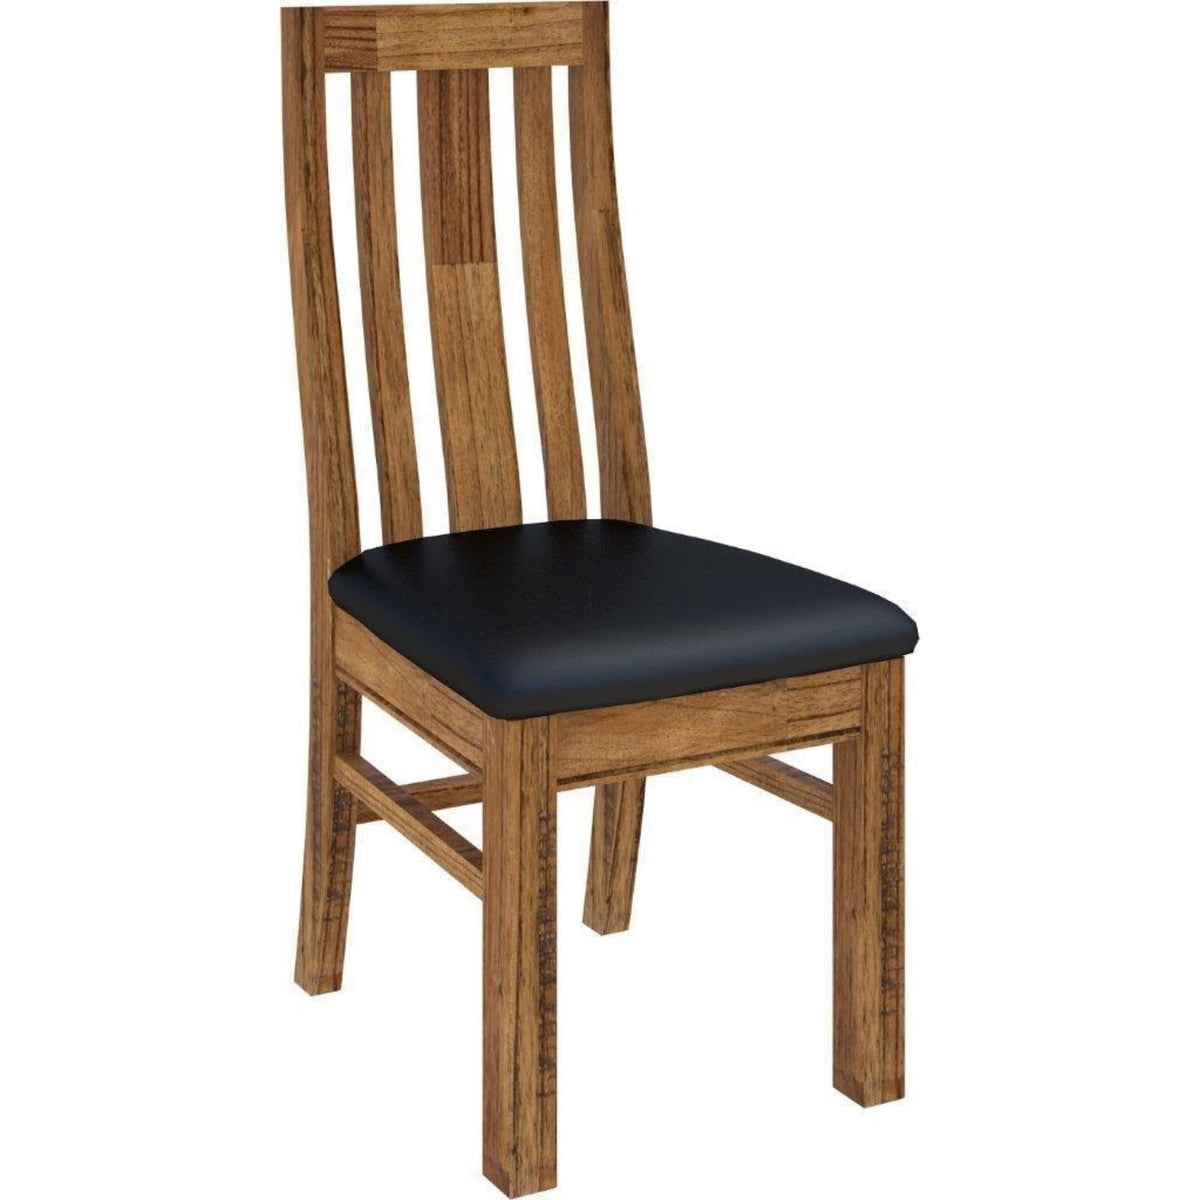 Birdsville PU Seat Dining Chair Set of 2 Solid Ash Wood Dining Furniture -Brown